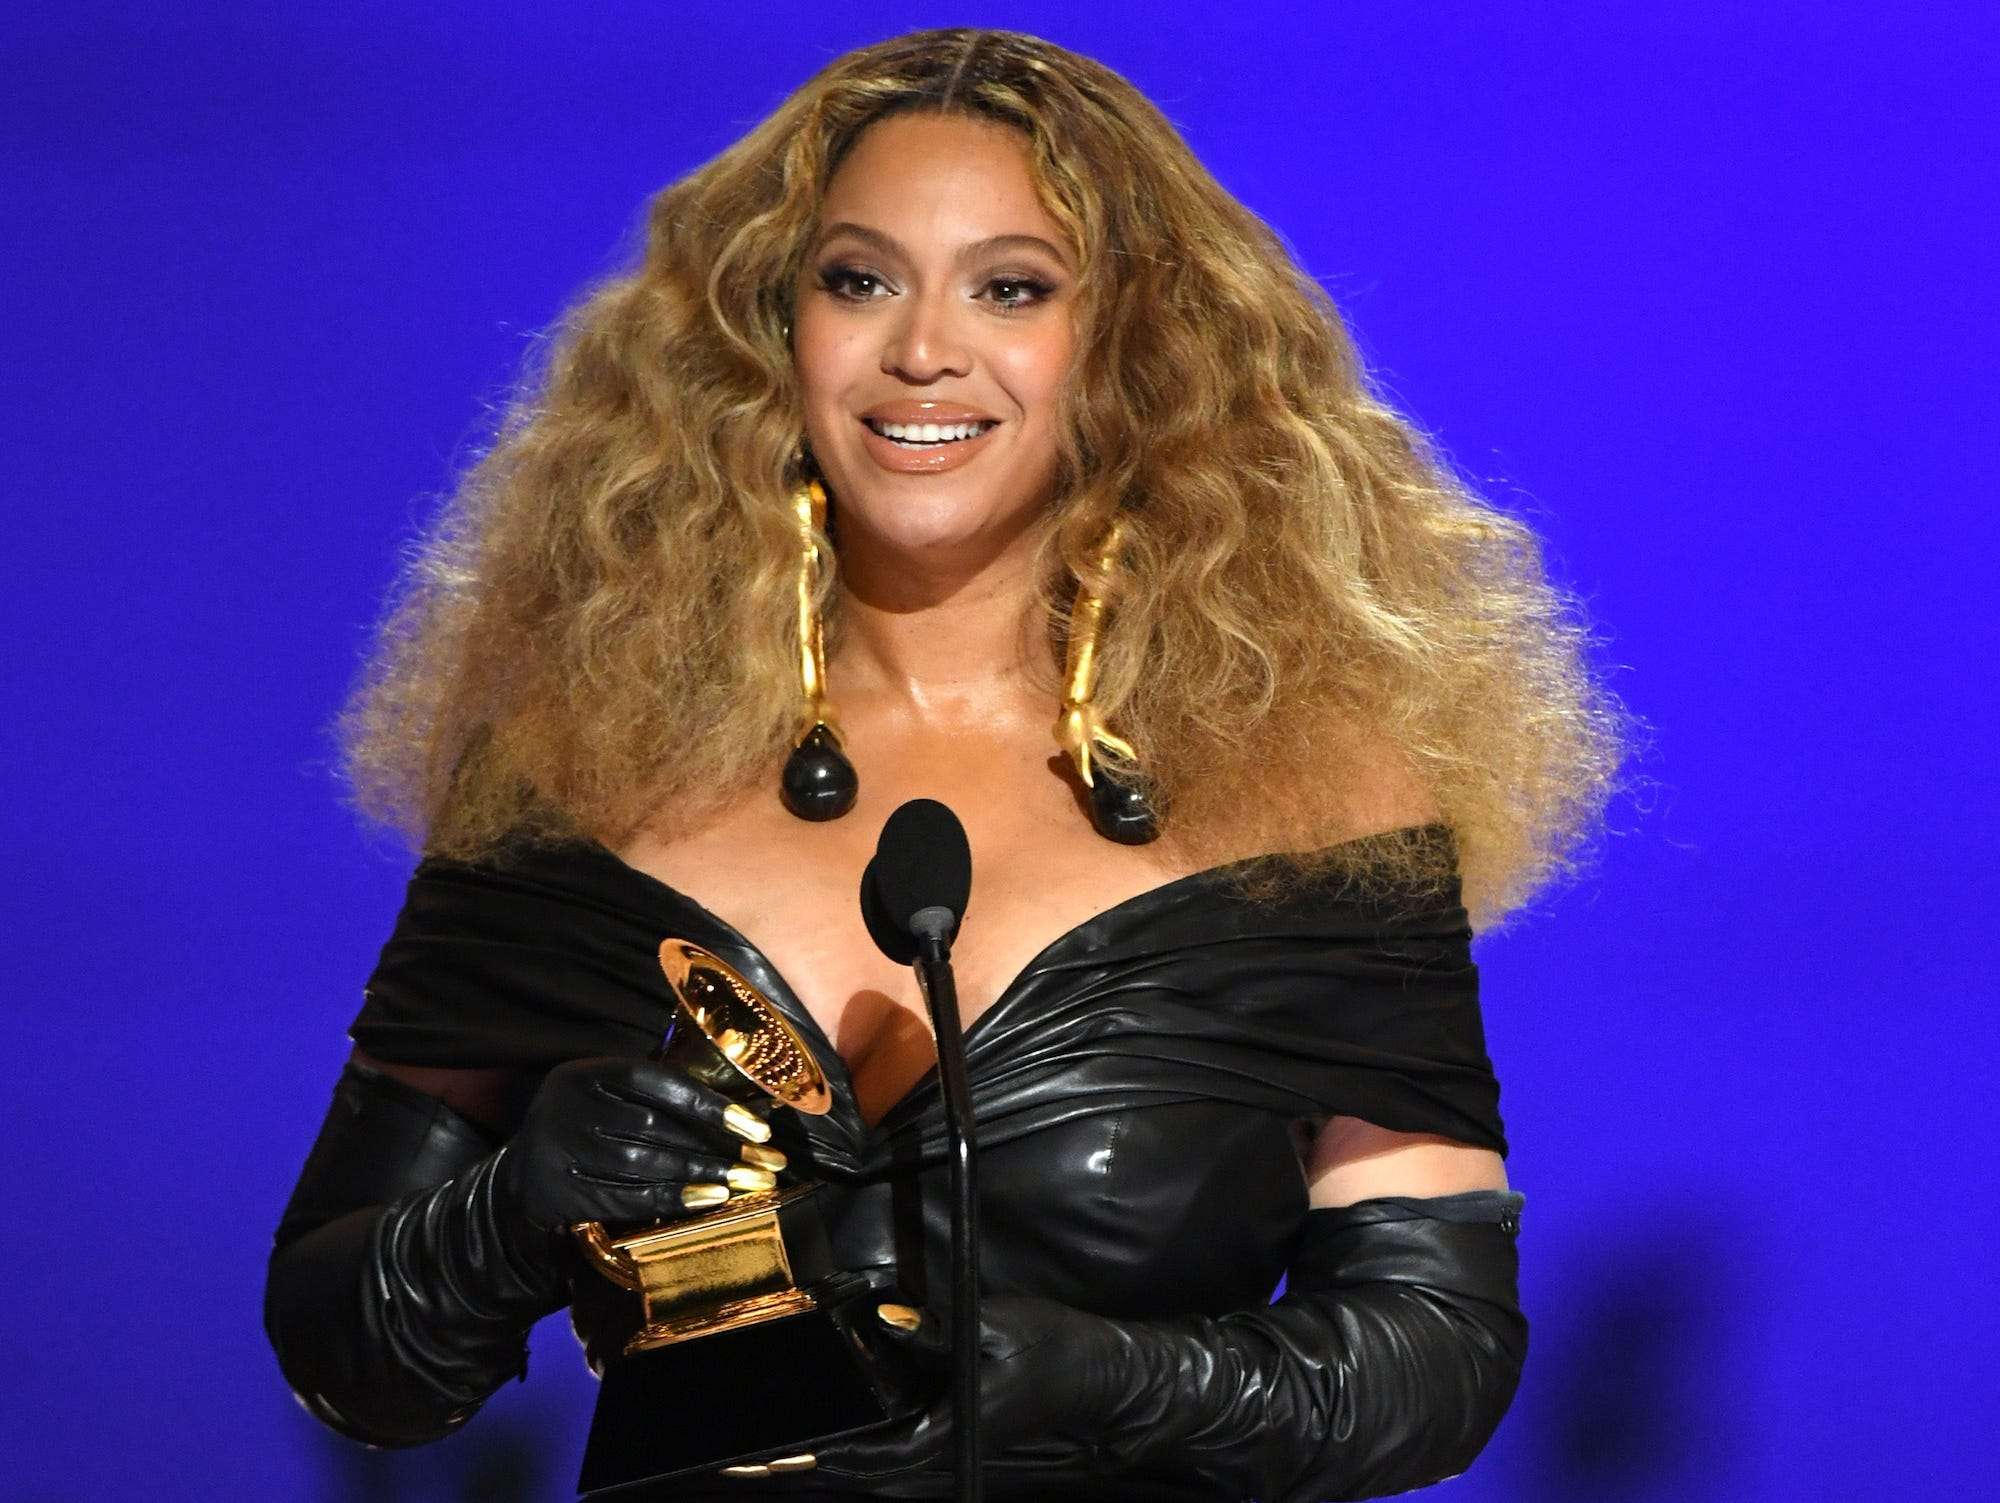 Beyoncé accepted her recordbreaking Grammys wearing a formfitting